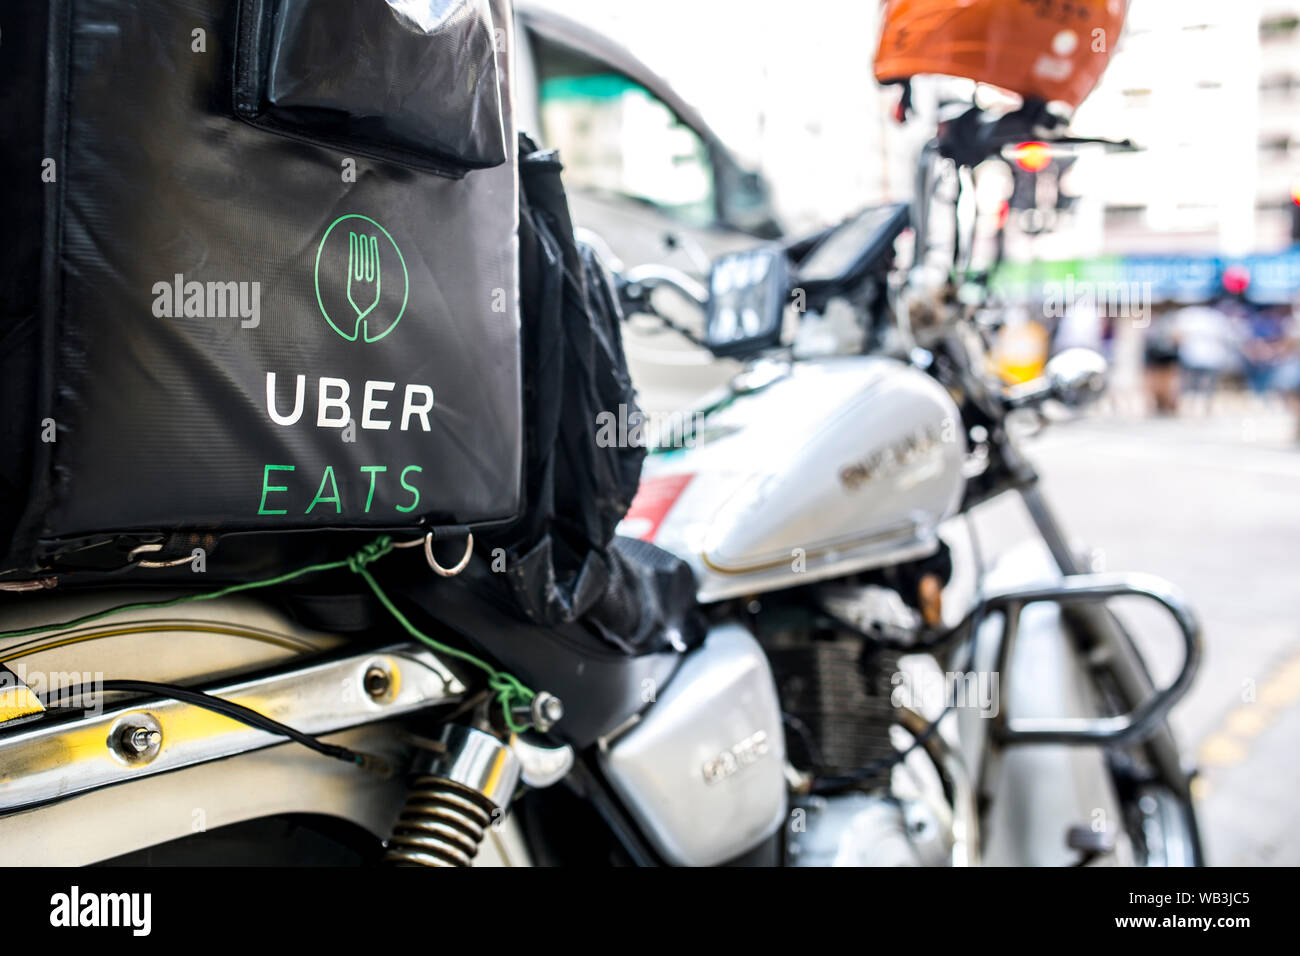 HONG KONG - OCTOBER 18, 2017: An Uber Eats  motorbike parked on the side of the road. Stock Photo